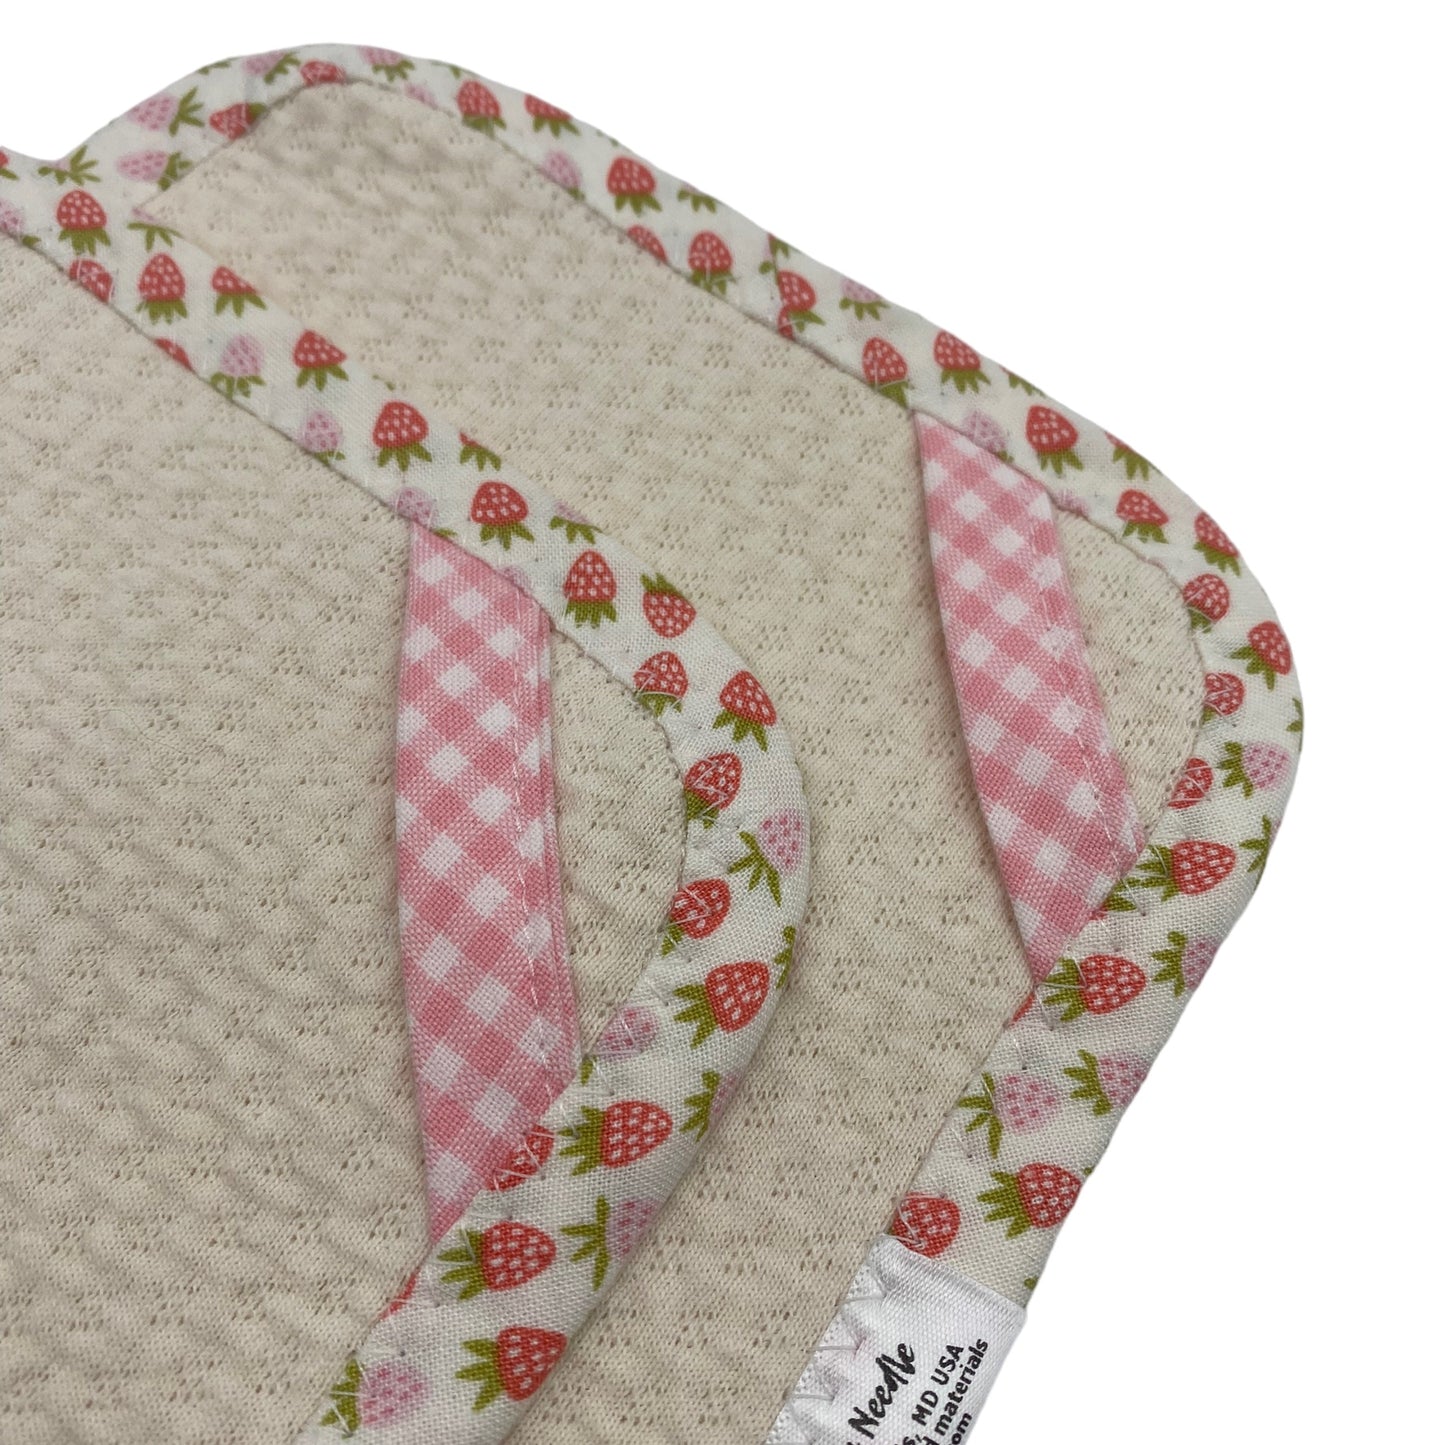 Set of 2 TINY Reusable Paper Towels - Strawberries with Gingham